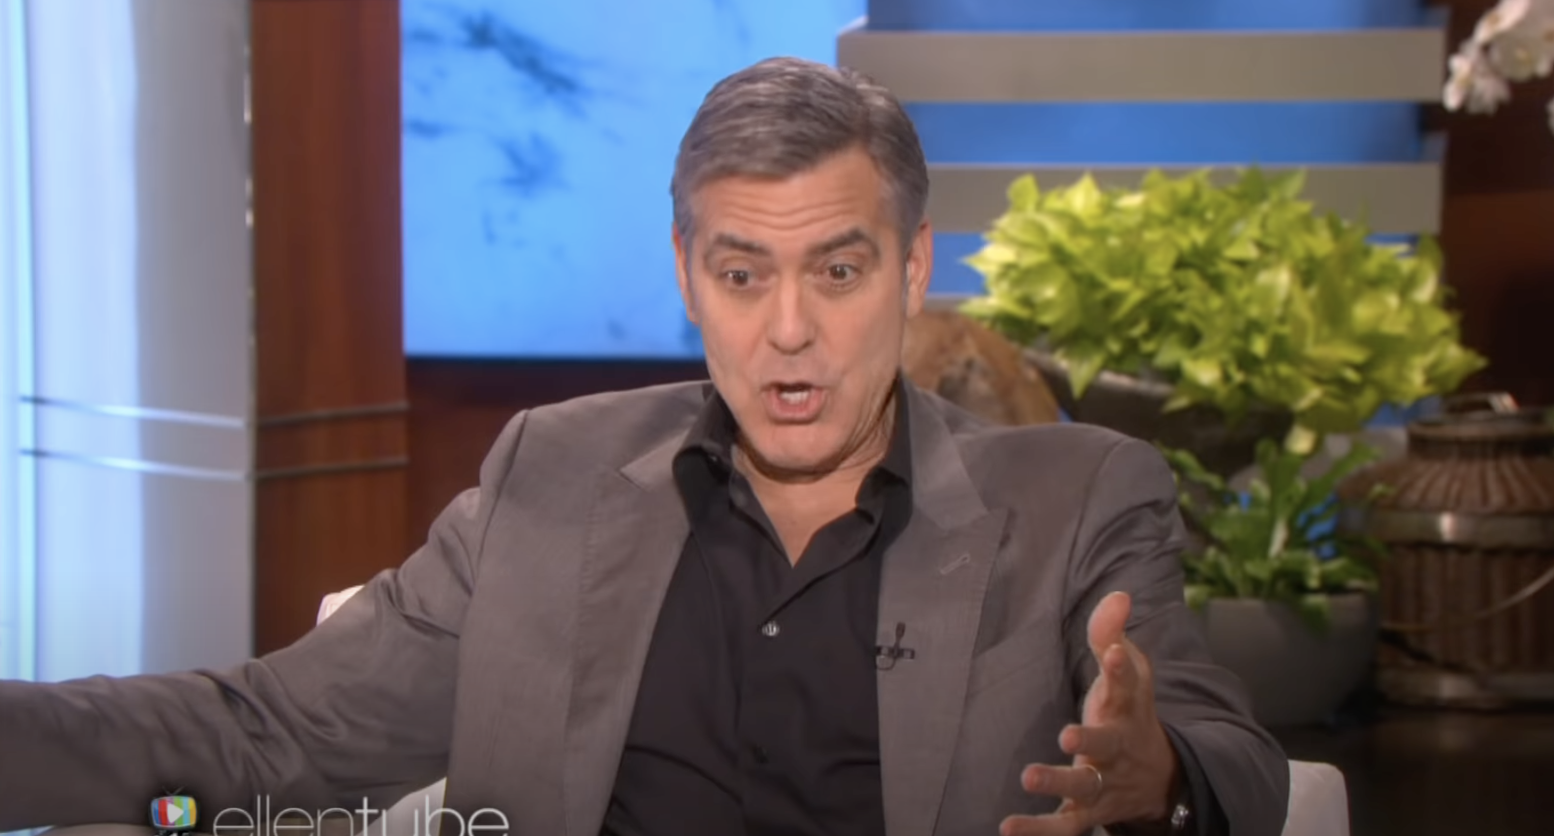 George Clooney on Ellen talking with lots of expression